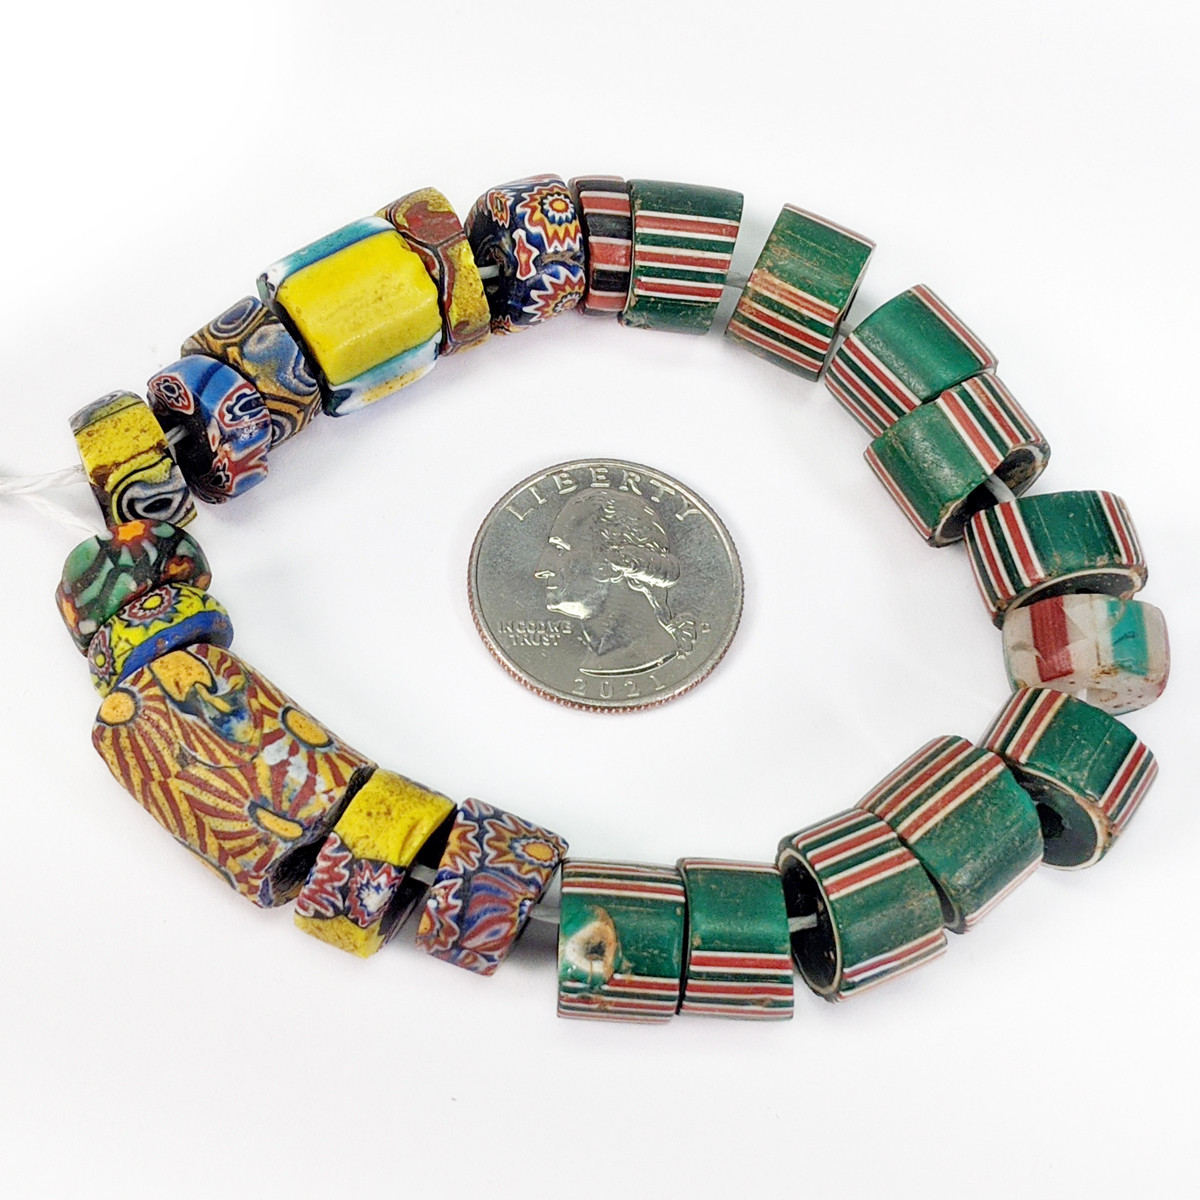 Bracelet of African Trade Beads of Brass Disk Beads, Krobo Powder Glass and  Magnetic Clasp from Artizan Made, A Handmade Collective of Online Shops